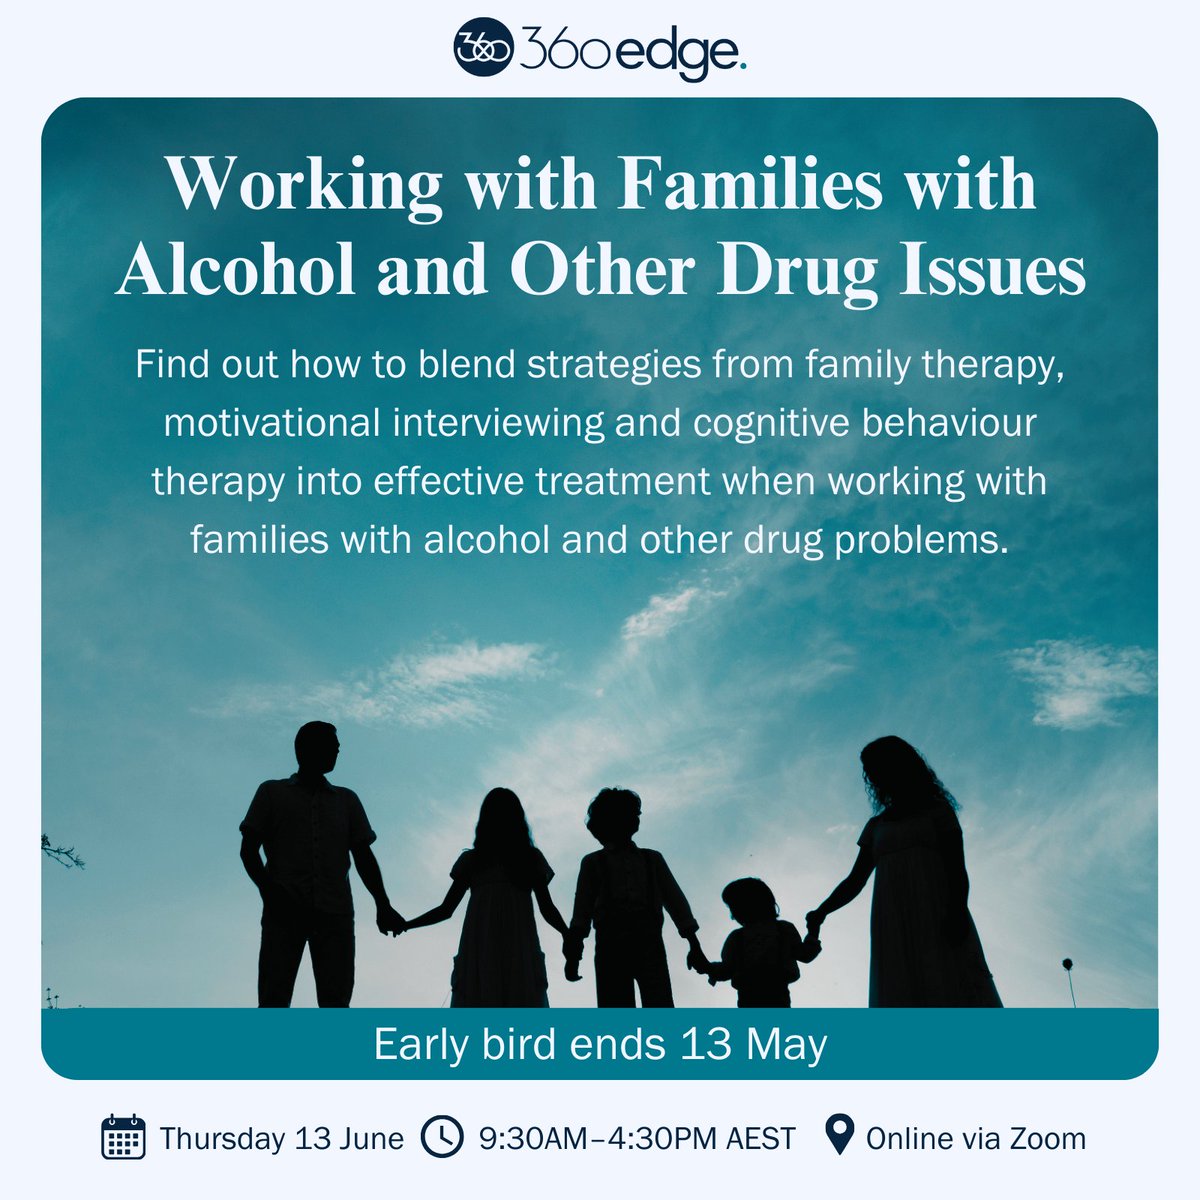 Family treatment can improve family and social functioning, help engage and retain people in treatment, reduce drug use and other problems, and discourage relapse. With this workshop, you'll learn how to effectively engage and support families. Book now: bit.ly/3SwdwM1